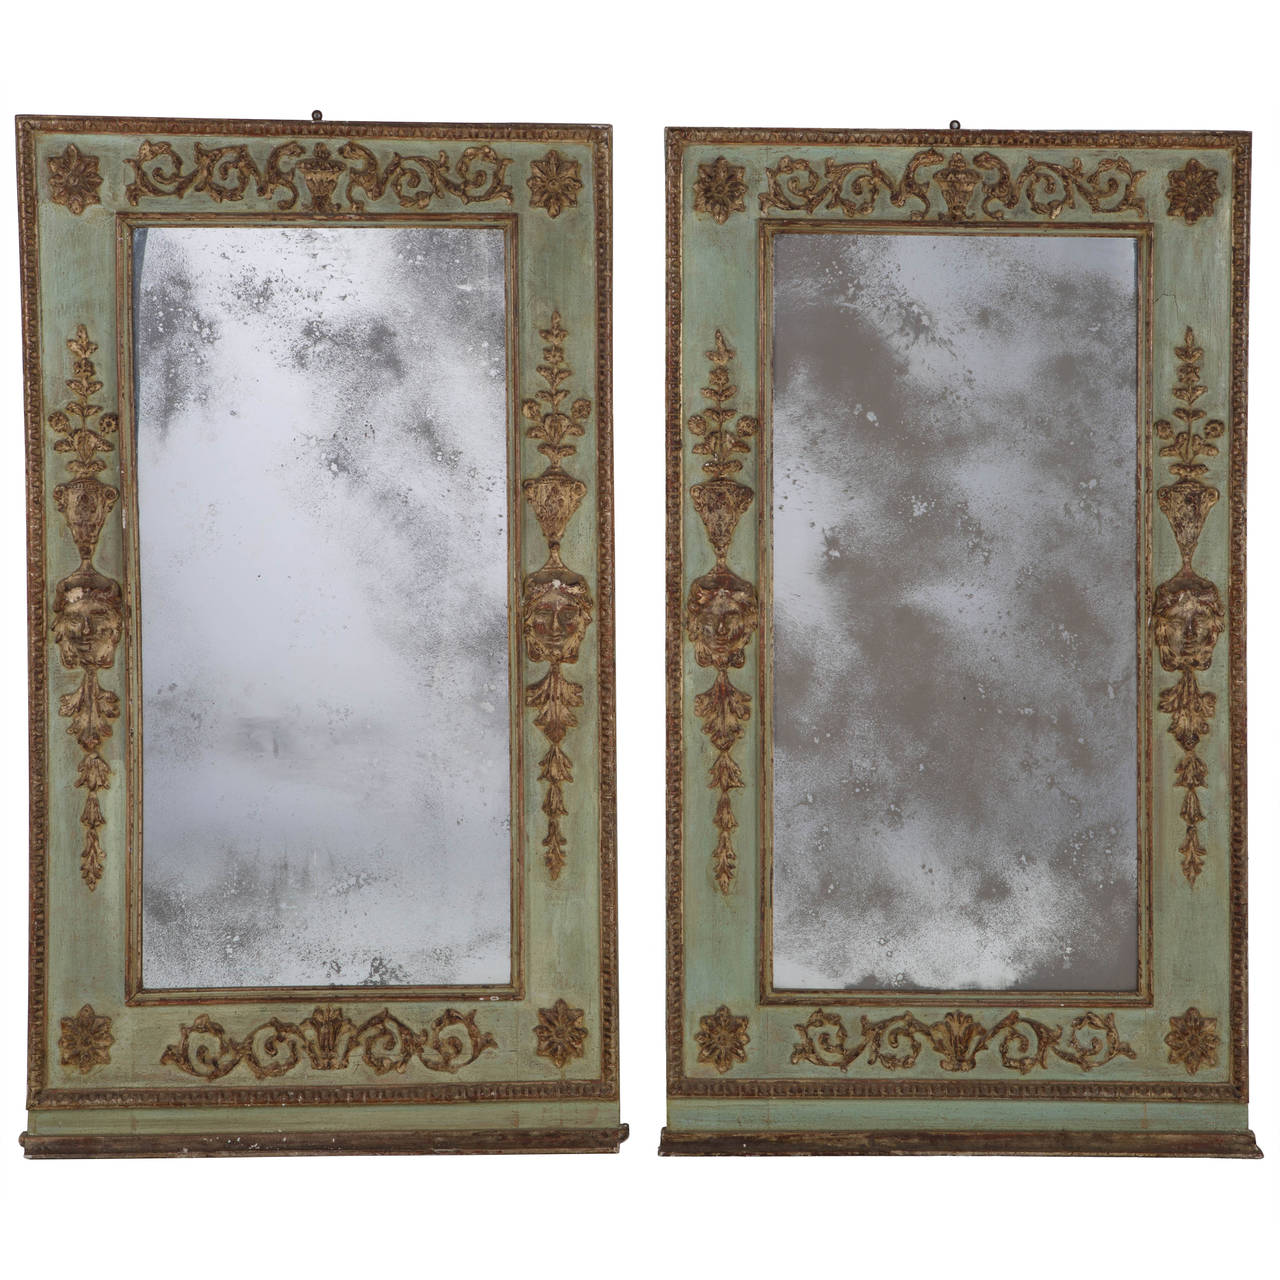 Pair of painted Italian consoles with mirrors c.1950. Measurements shown below are for consoles. Mirrors measure 140cm high x 79.5cm wide x 4cm deep.